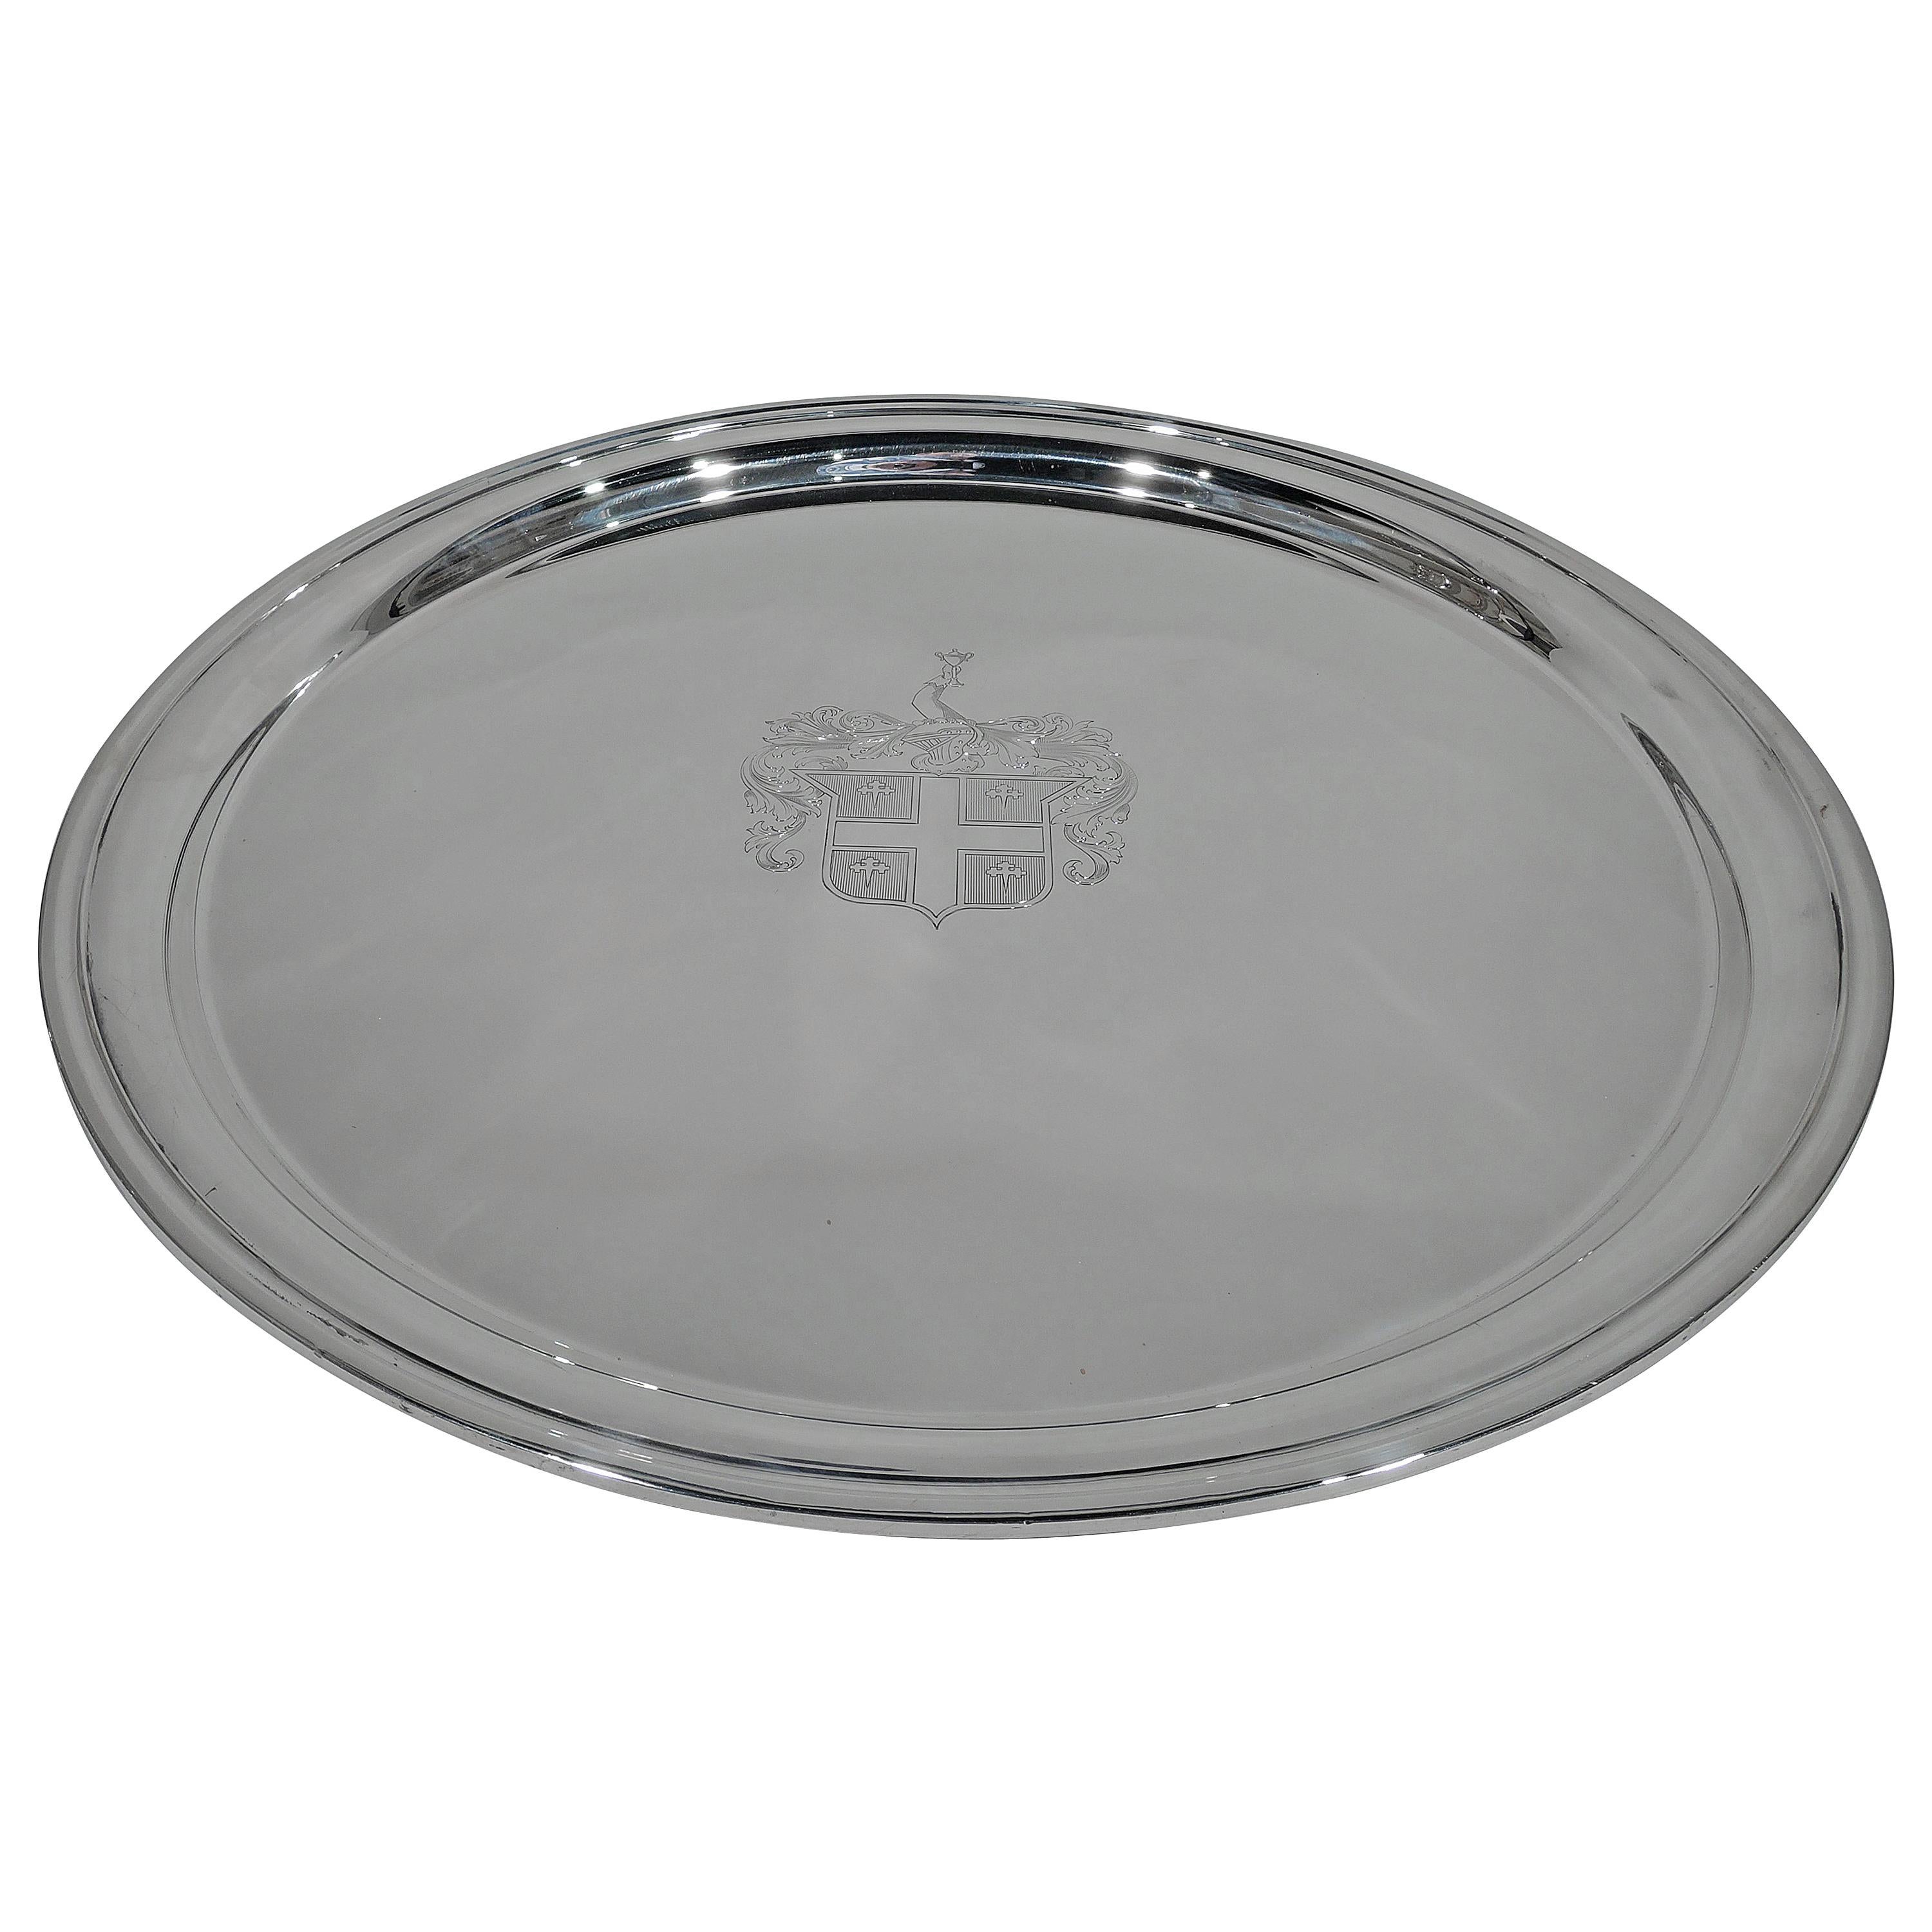 Very Large and Heavy American Sterling Silver Tray with Engraved Armorial